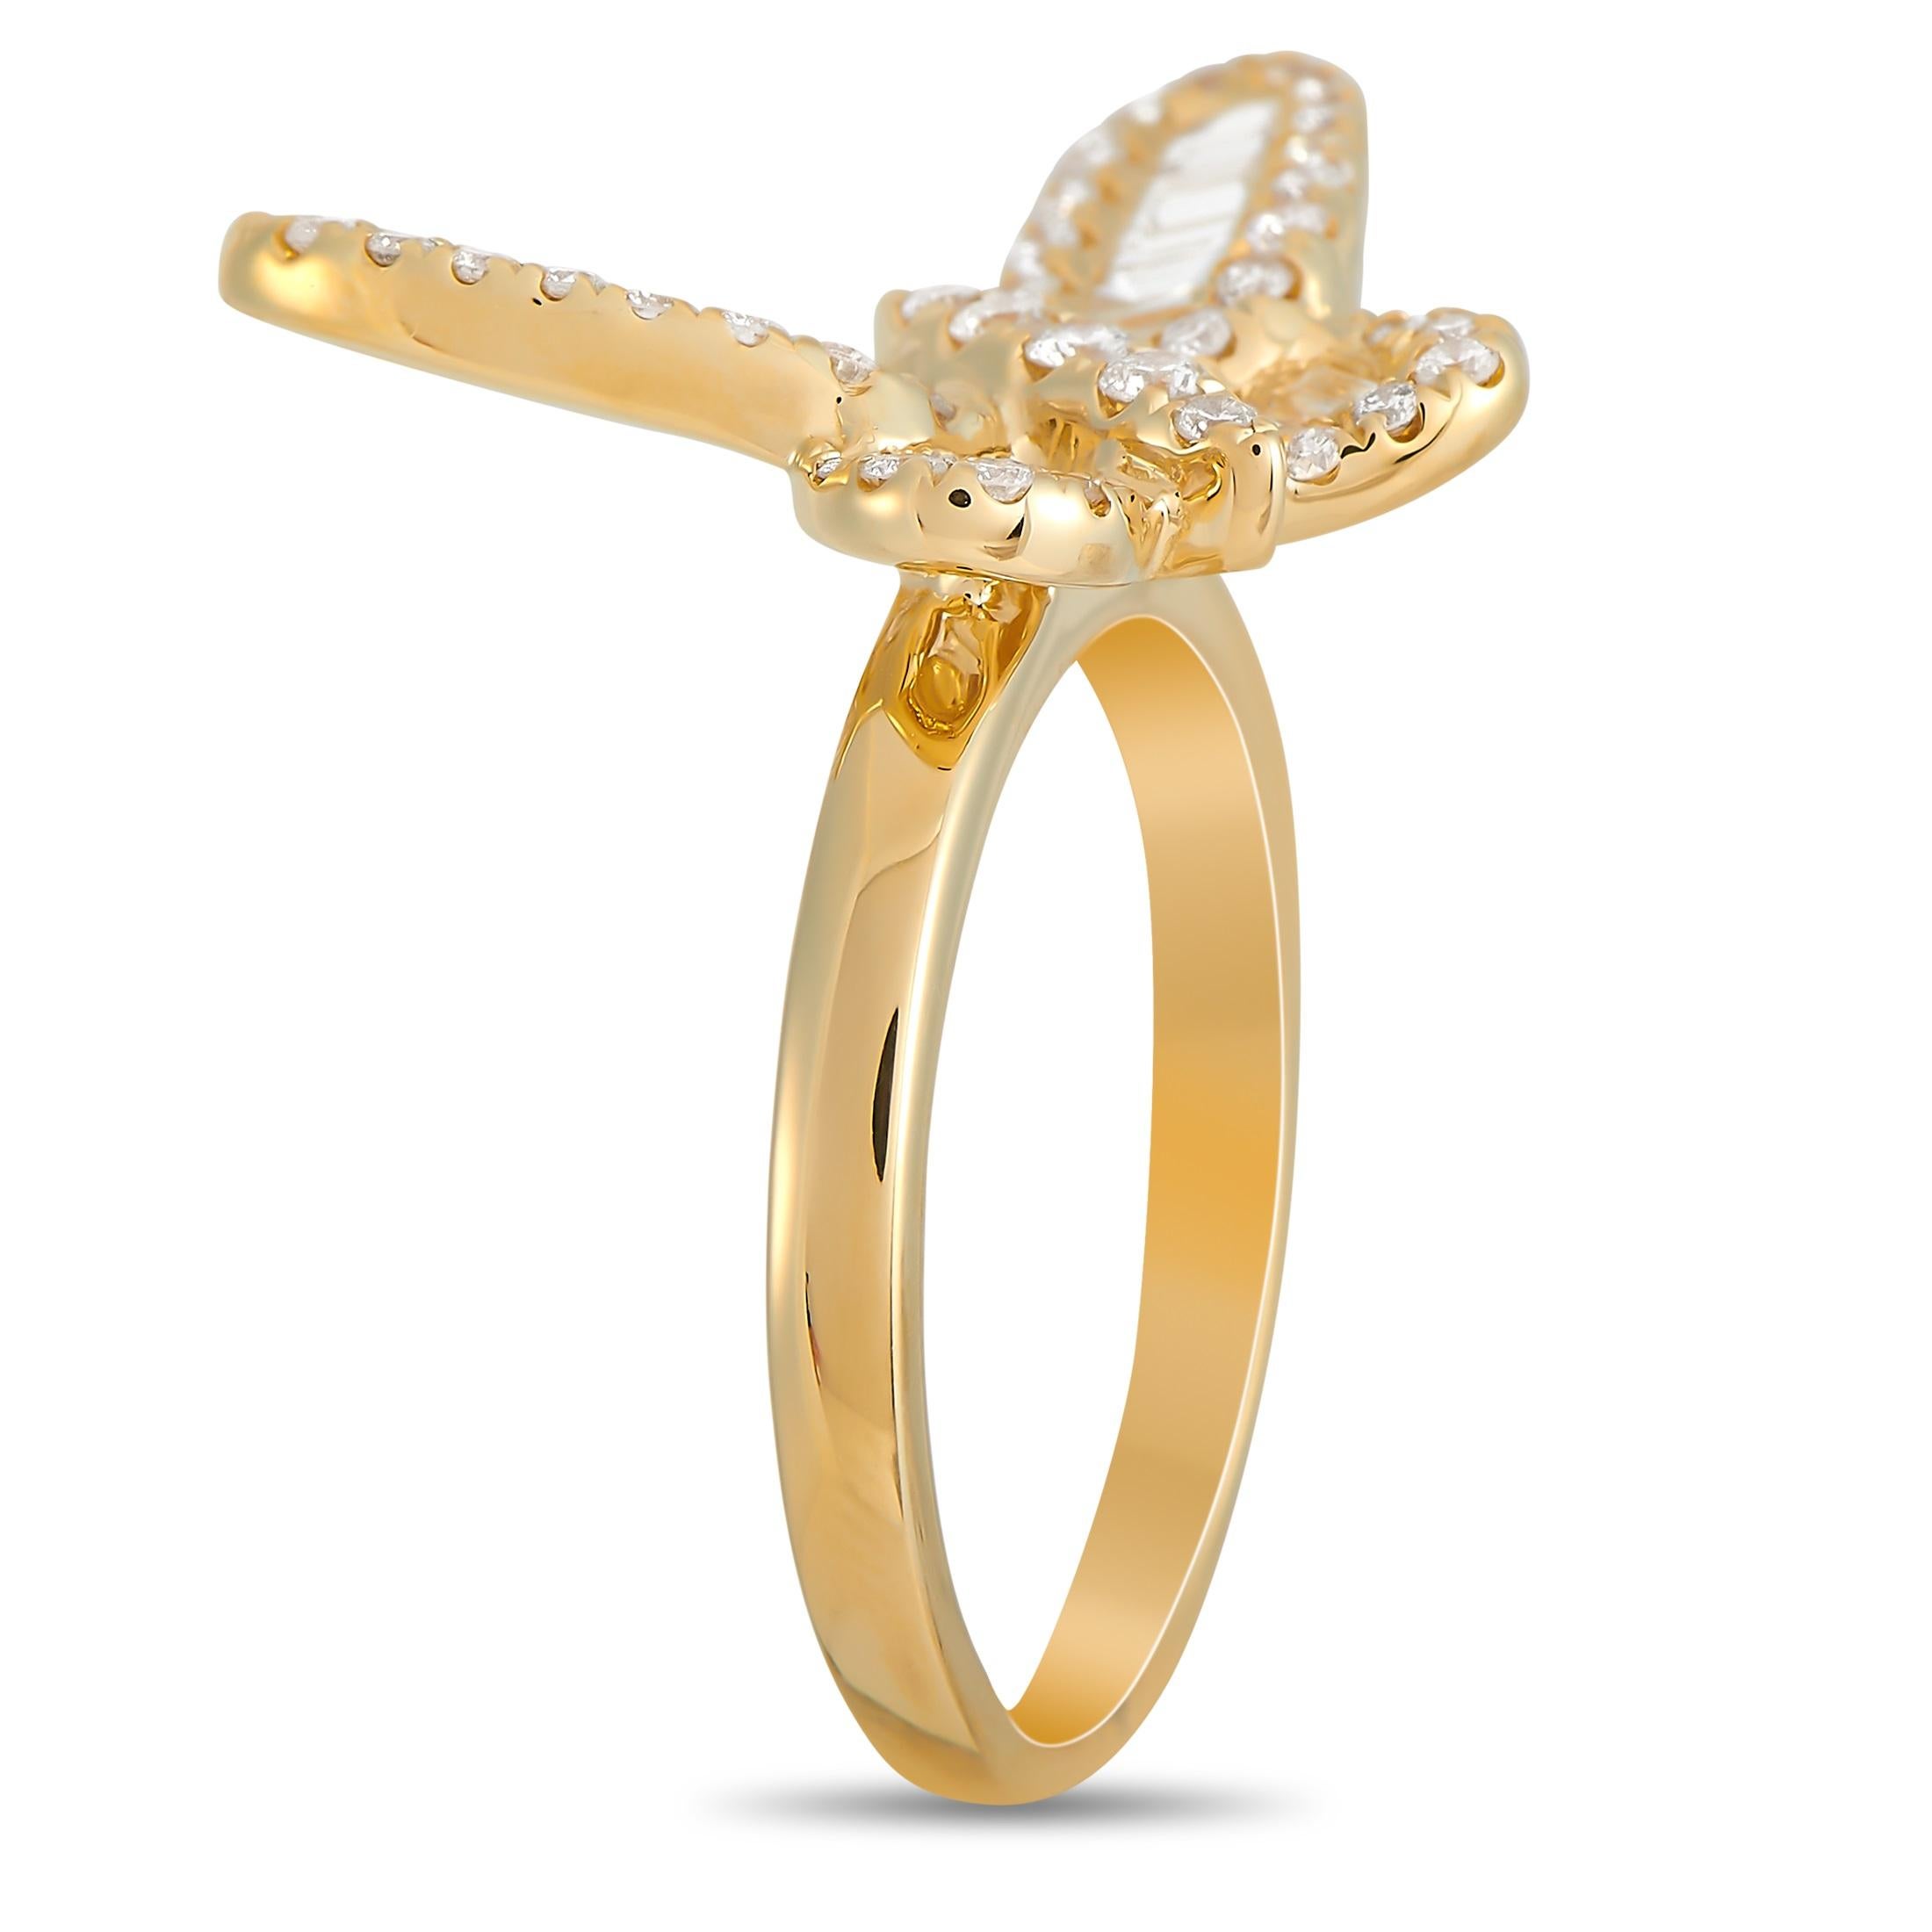 This cute LB Exclusive butterfly ring is made with 18K yellow gold in a butterfly shape and set with 0.42 carats of round diamonds forming the butterflies body and outlining the wings, with 0.58 carats of baguette-cut diamonds filling in the wings,